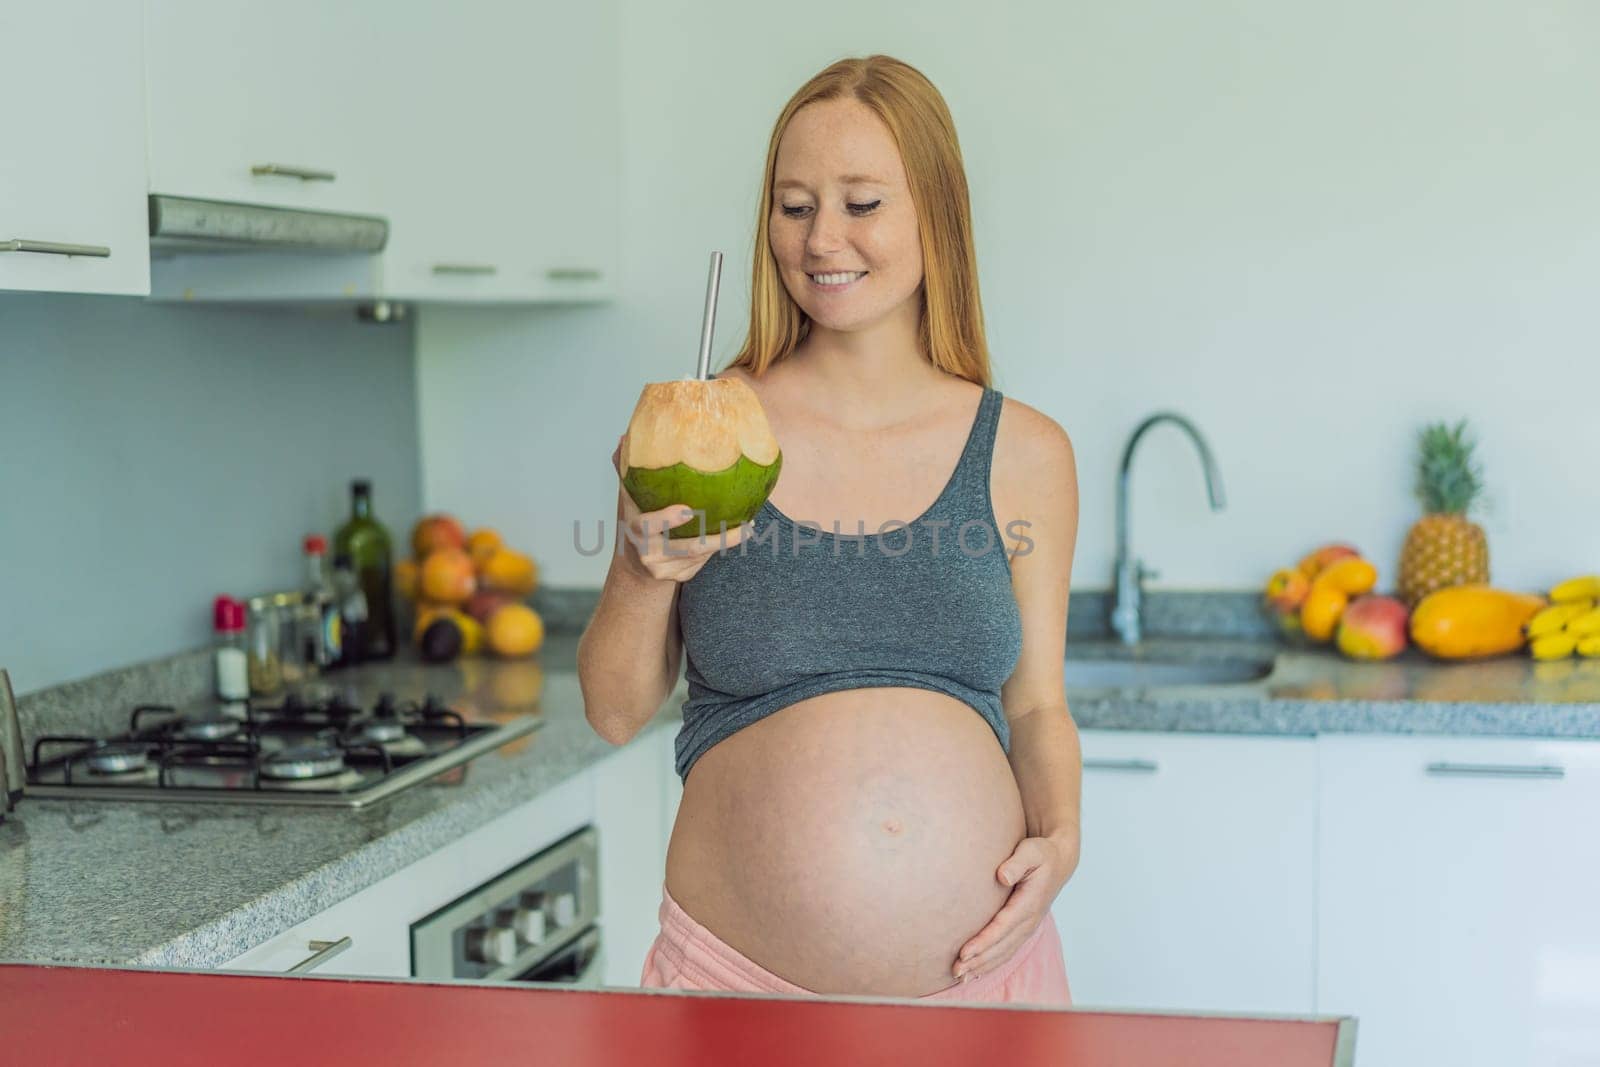 Quenching her pregnancy thirst with a refreshing choice, a pregnant woman joyfully drinks coconut water from a coconut in the kitchen, embracing natural hydration during this special journey.